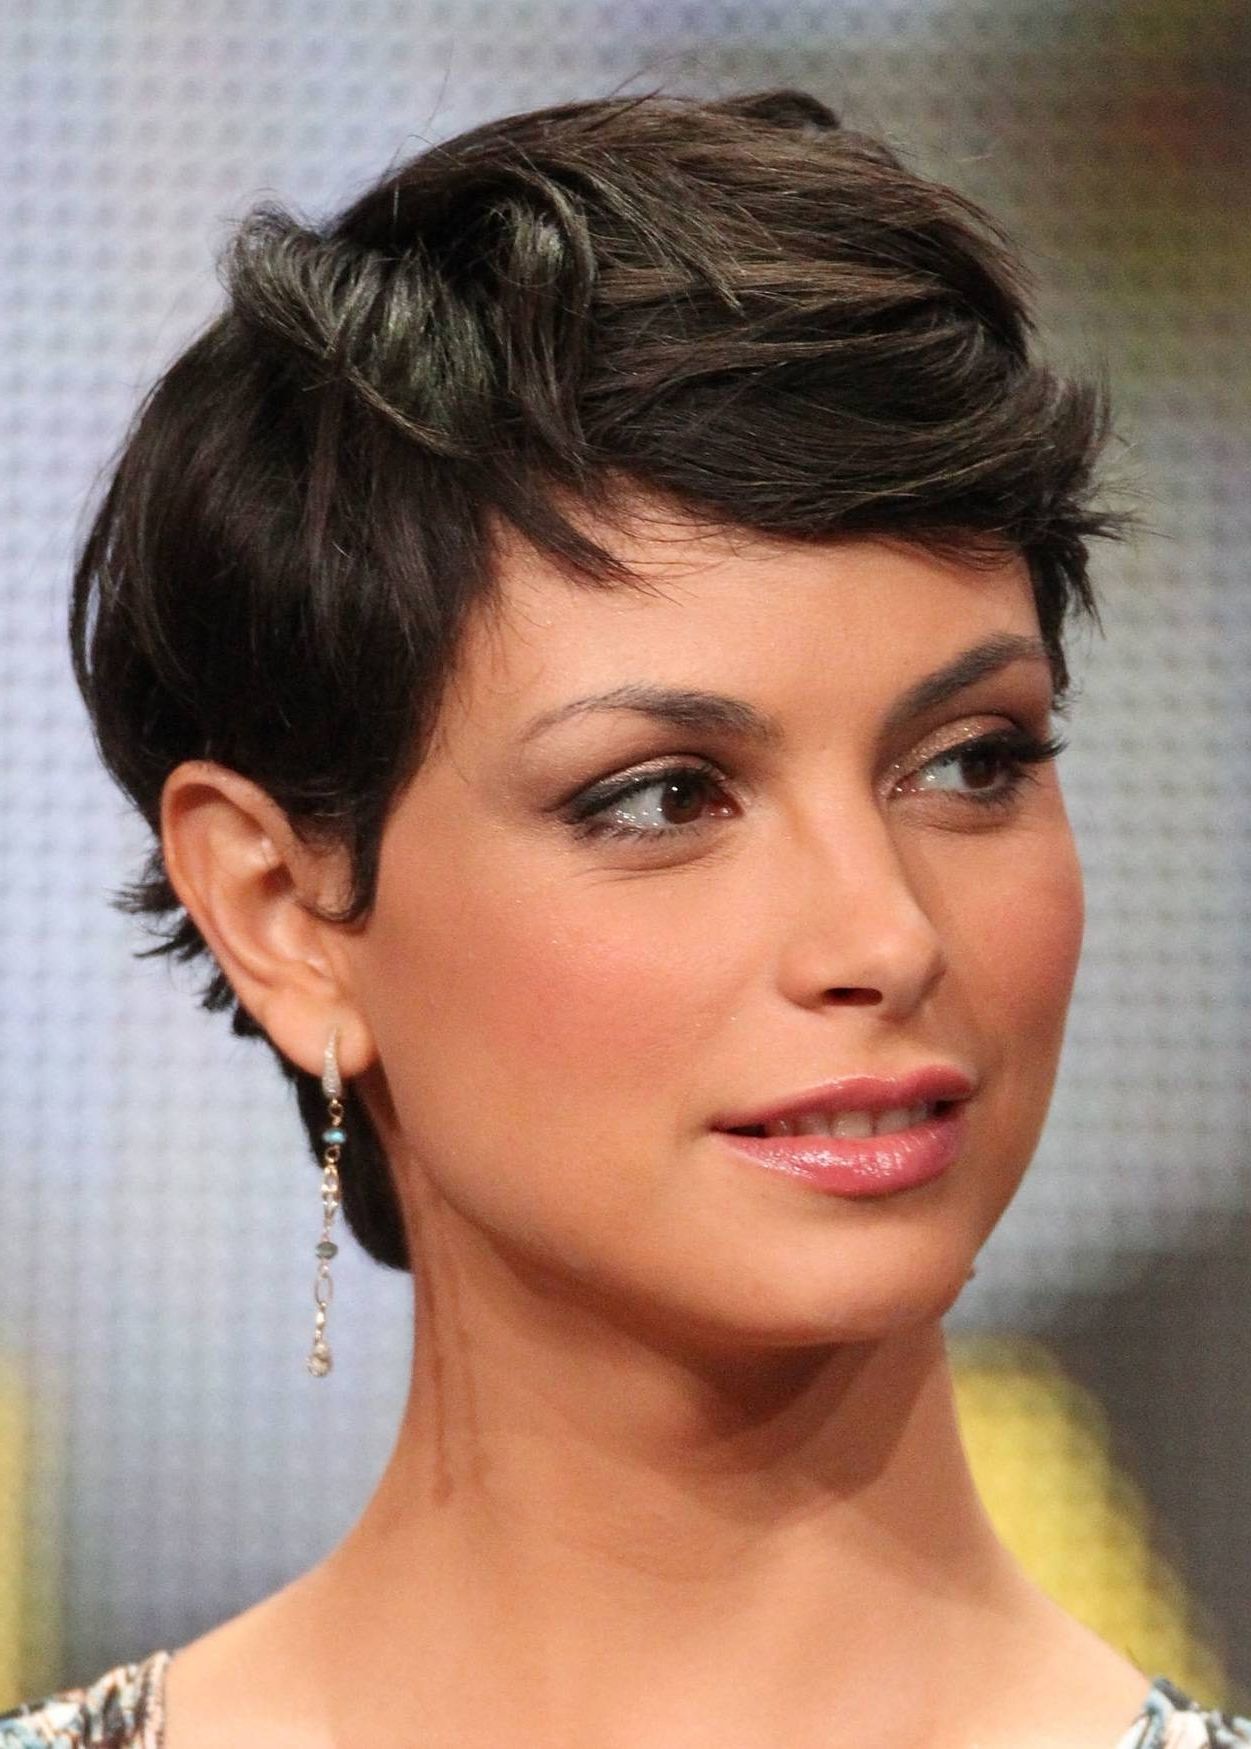 Pixie Hairstyle Short Hair Pertaining To Most Current Cropped Pixie Hairstyles (View 11 of 15)